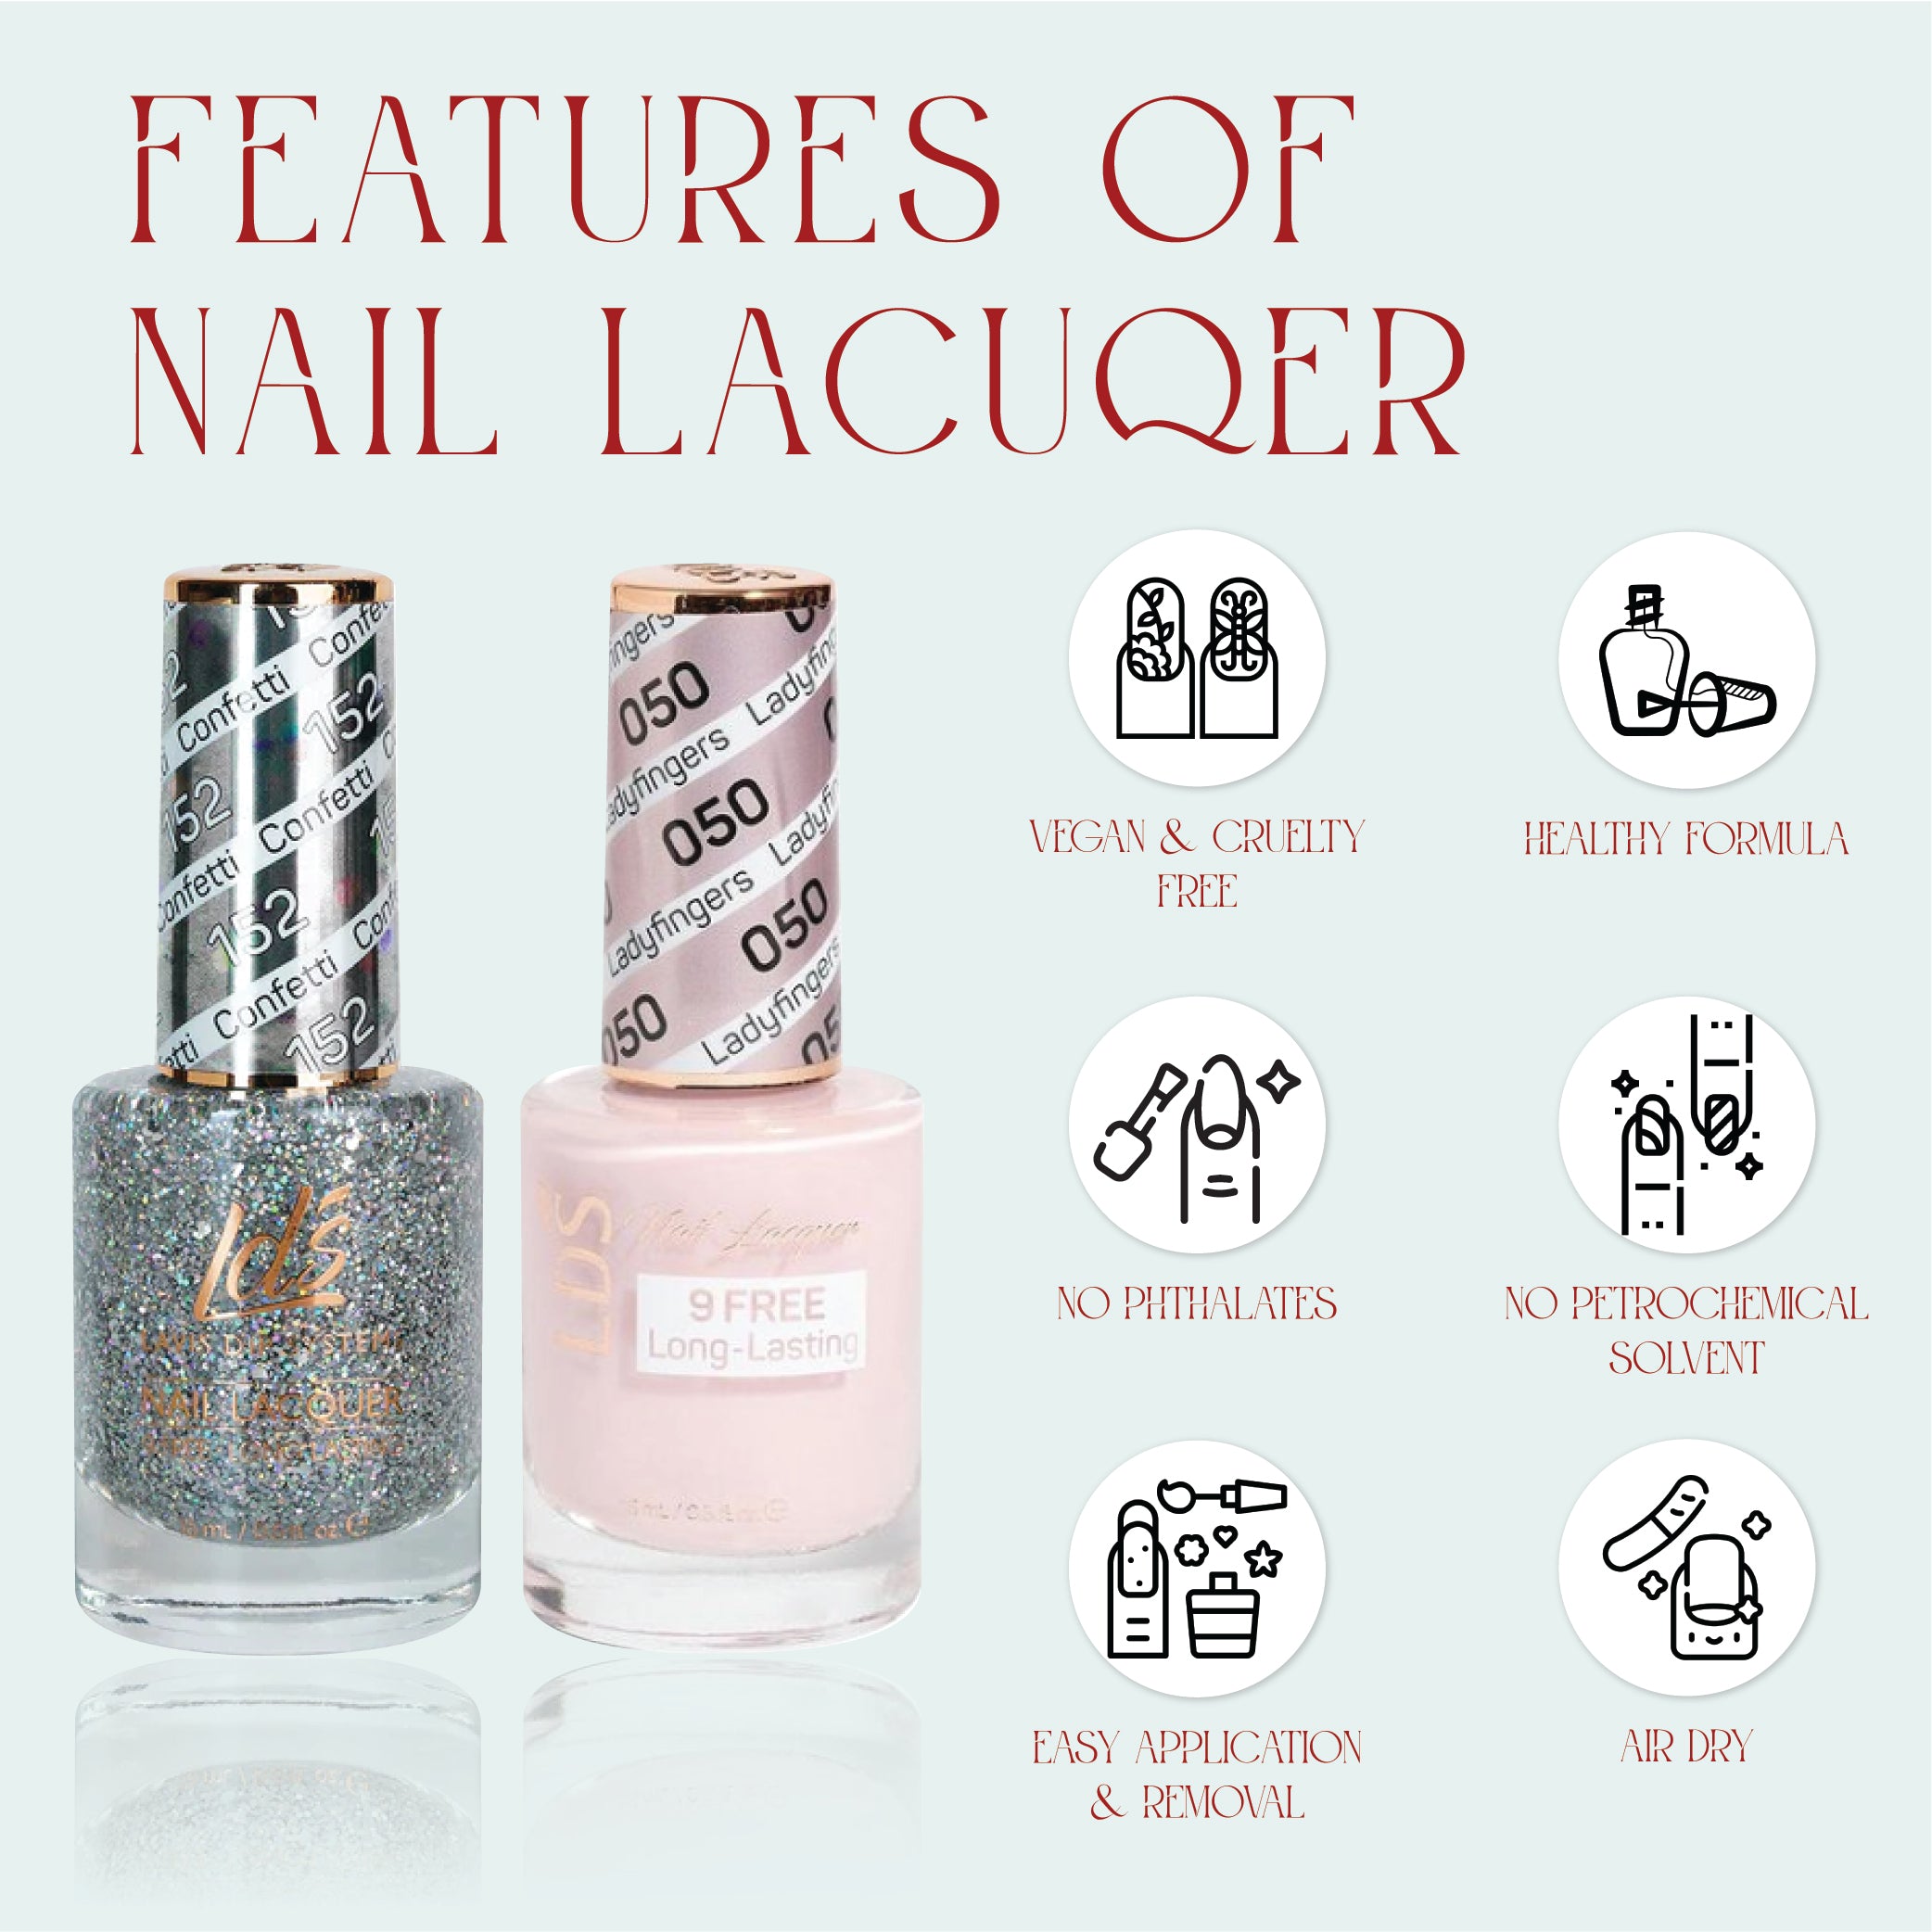 LDS 127 Dare To Wear - LDS Nail Lacquer 0.5oz